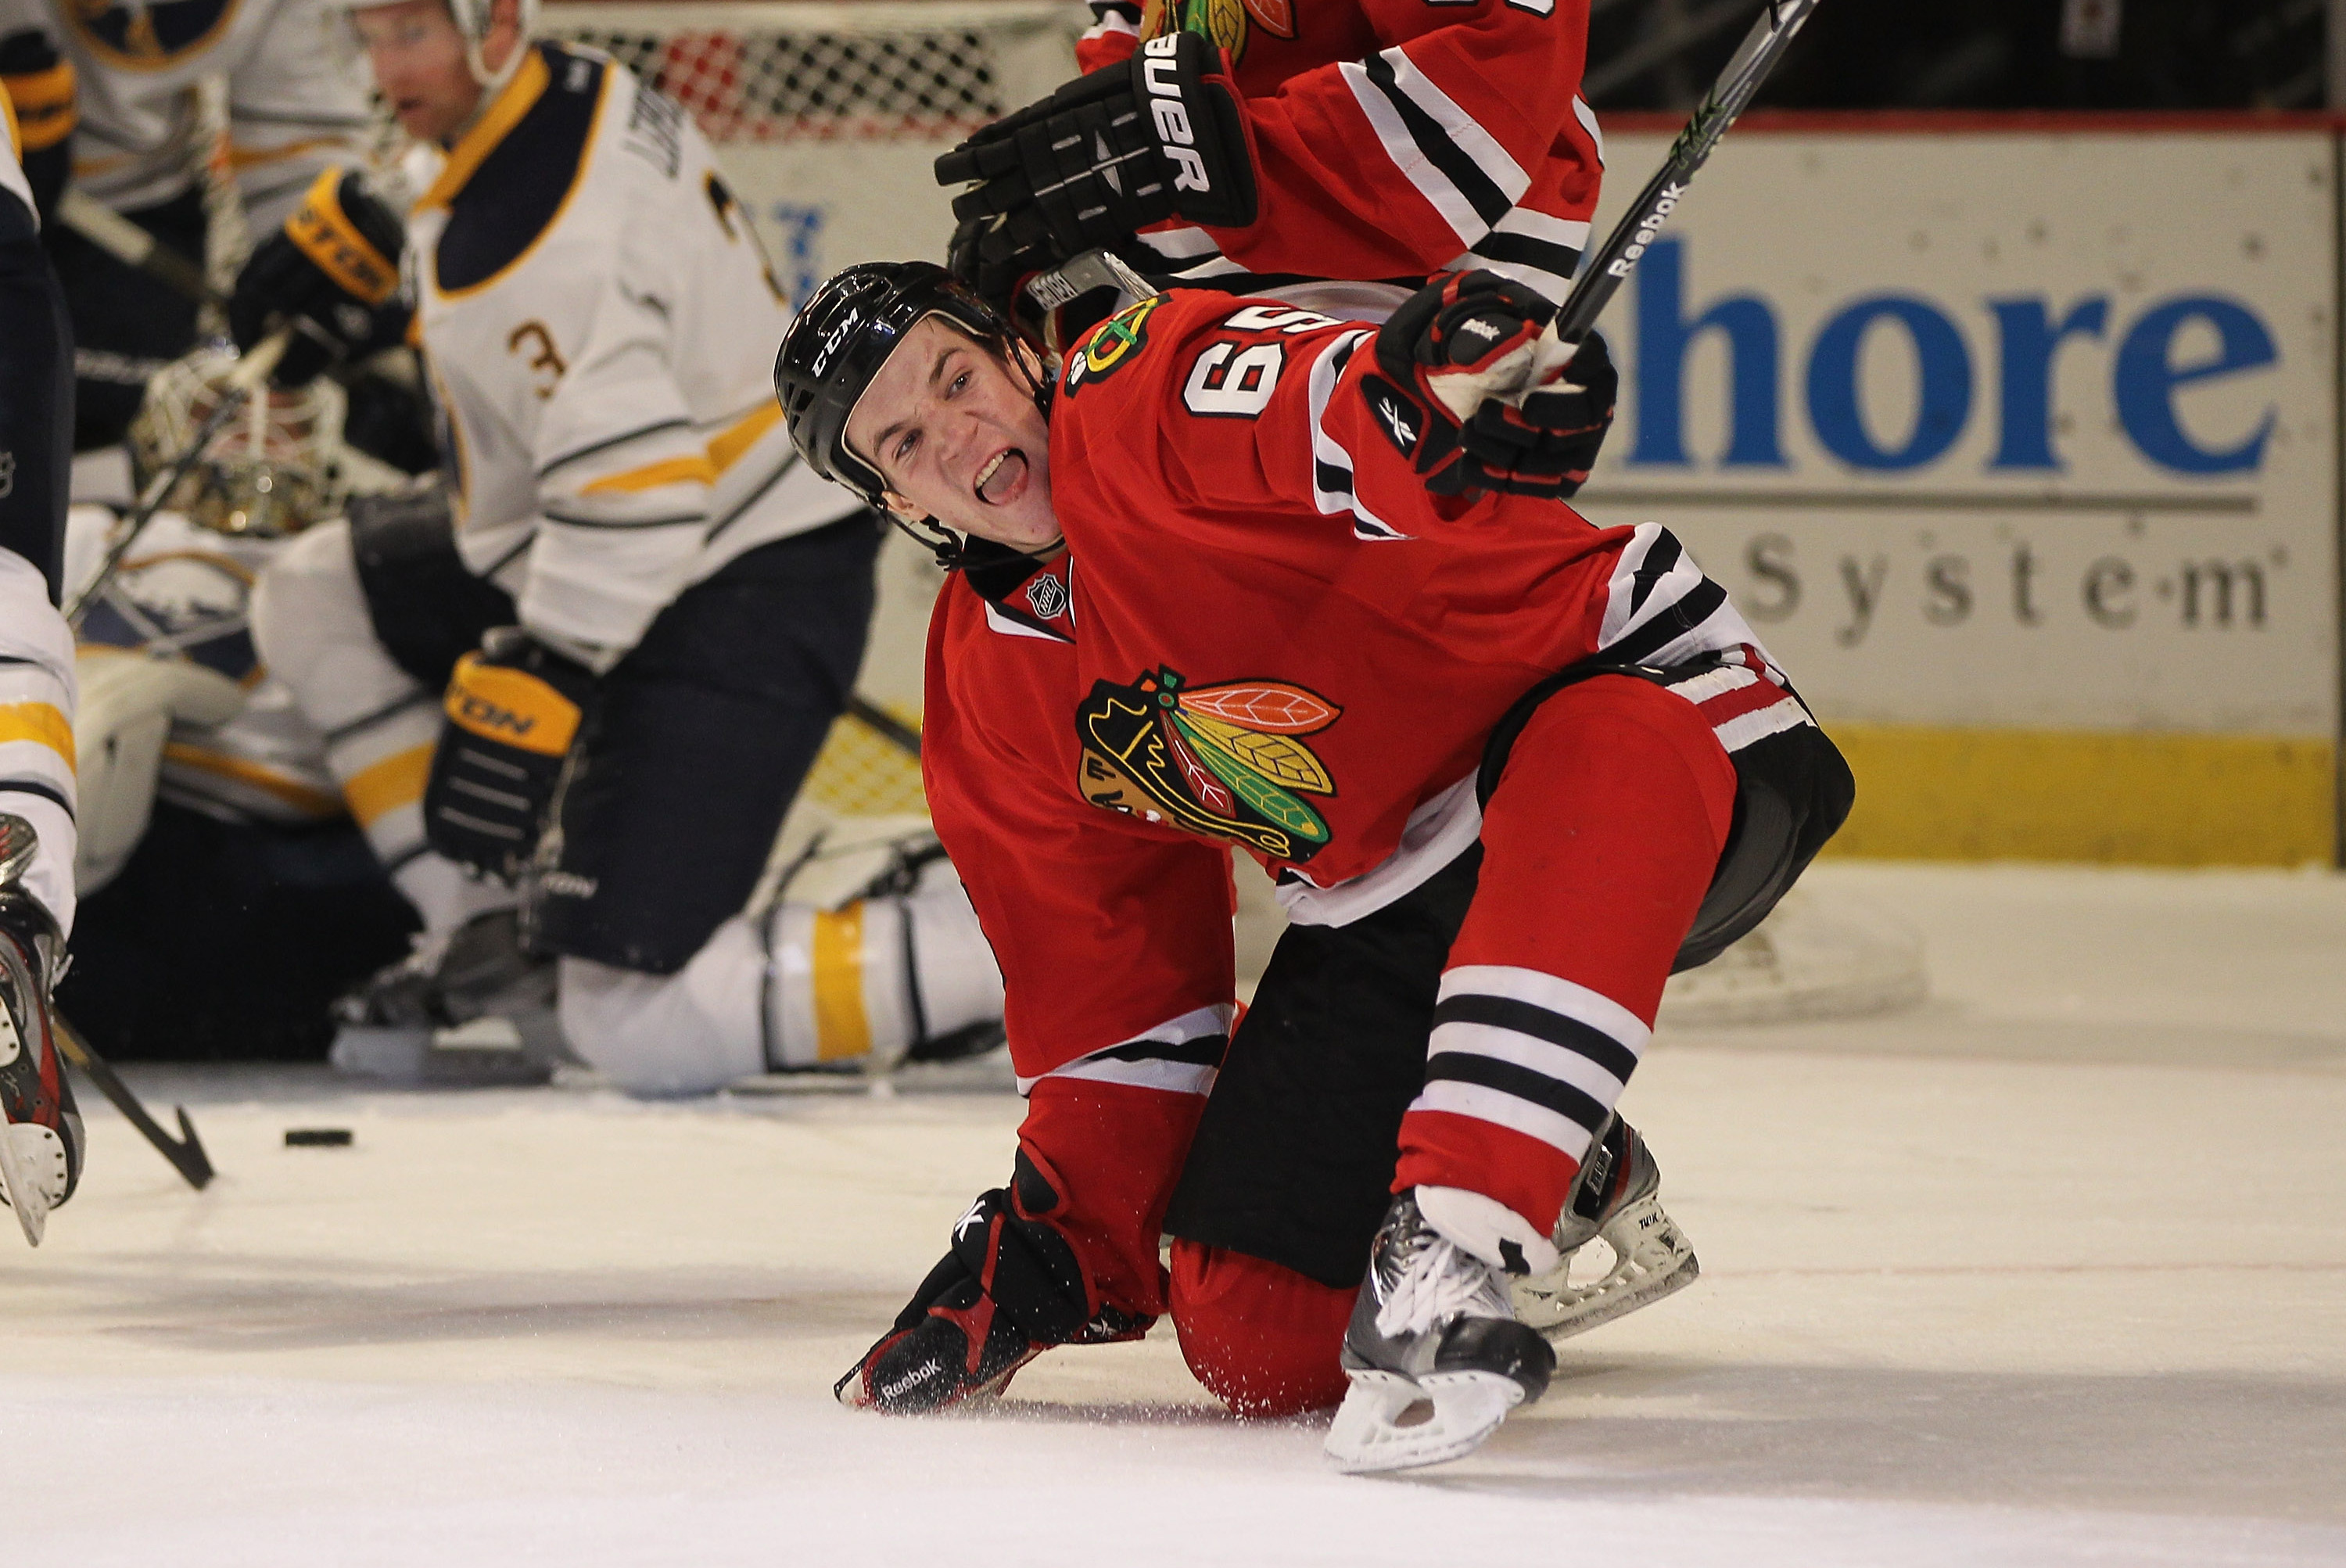 Blackhawks' Andrew Shaw will forgo playoffs, citing concussion